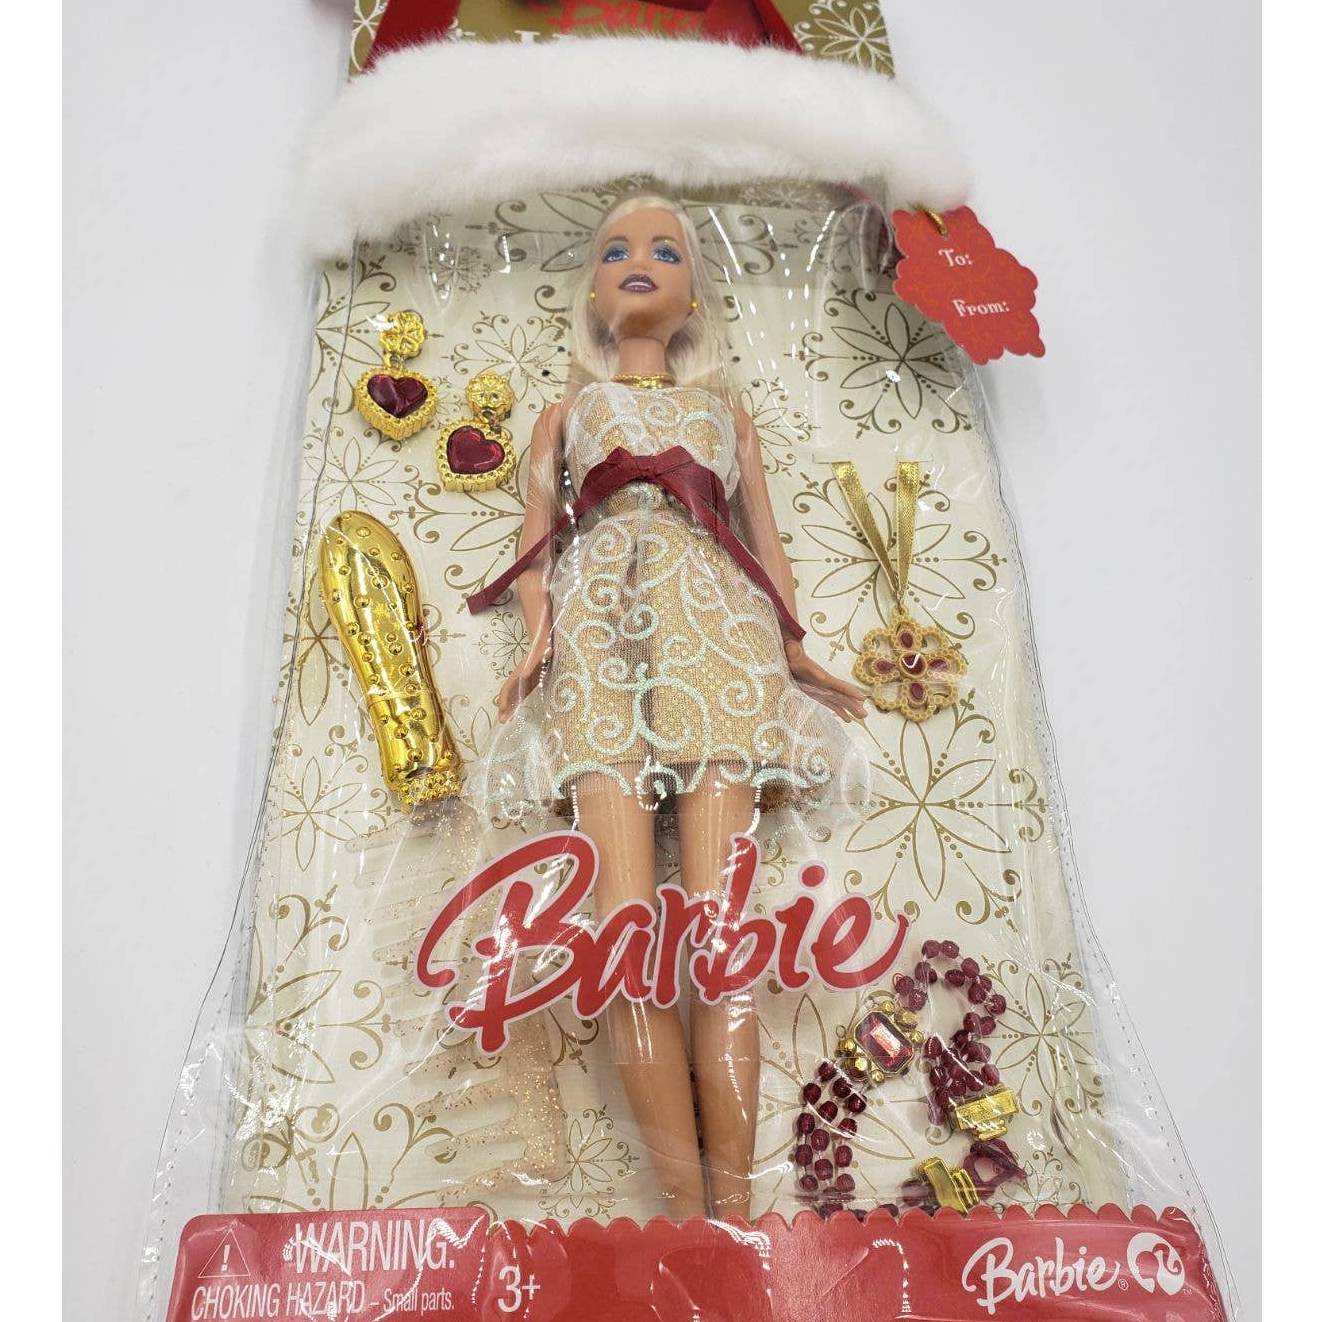 Barbie 2008 Holiday Sparkle Barbie Gift Set Doll Mattel M3531 Jew – Every Need Warehouse